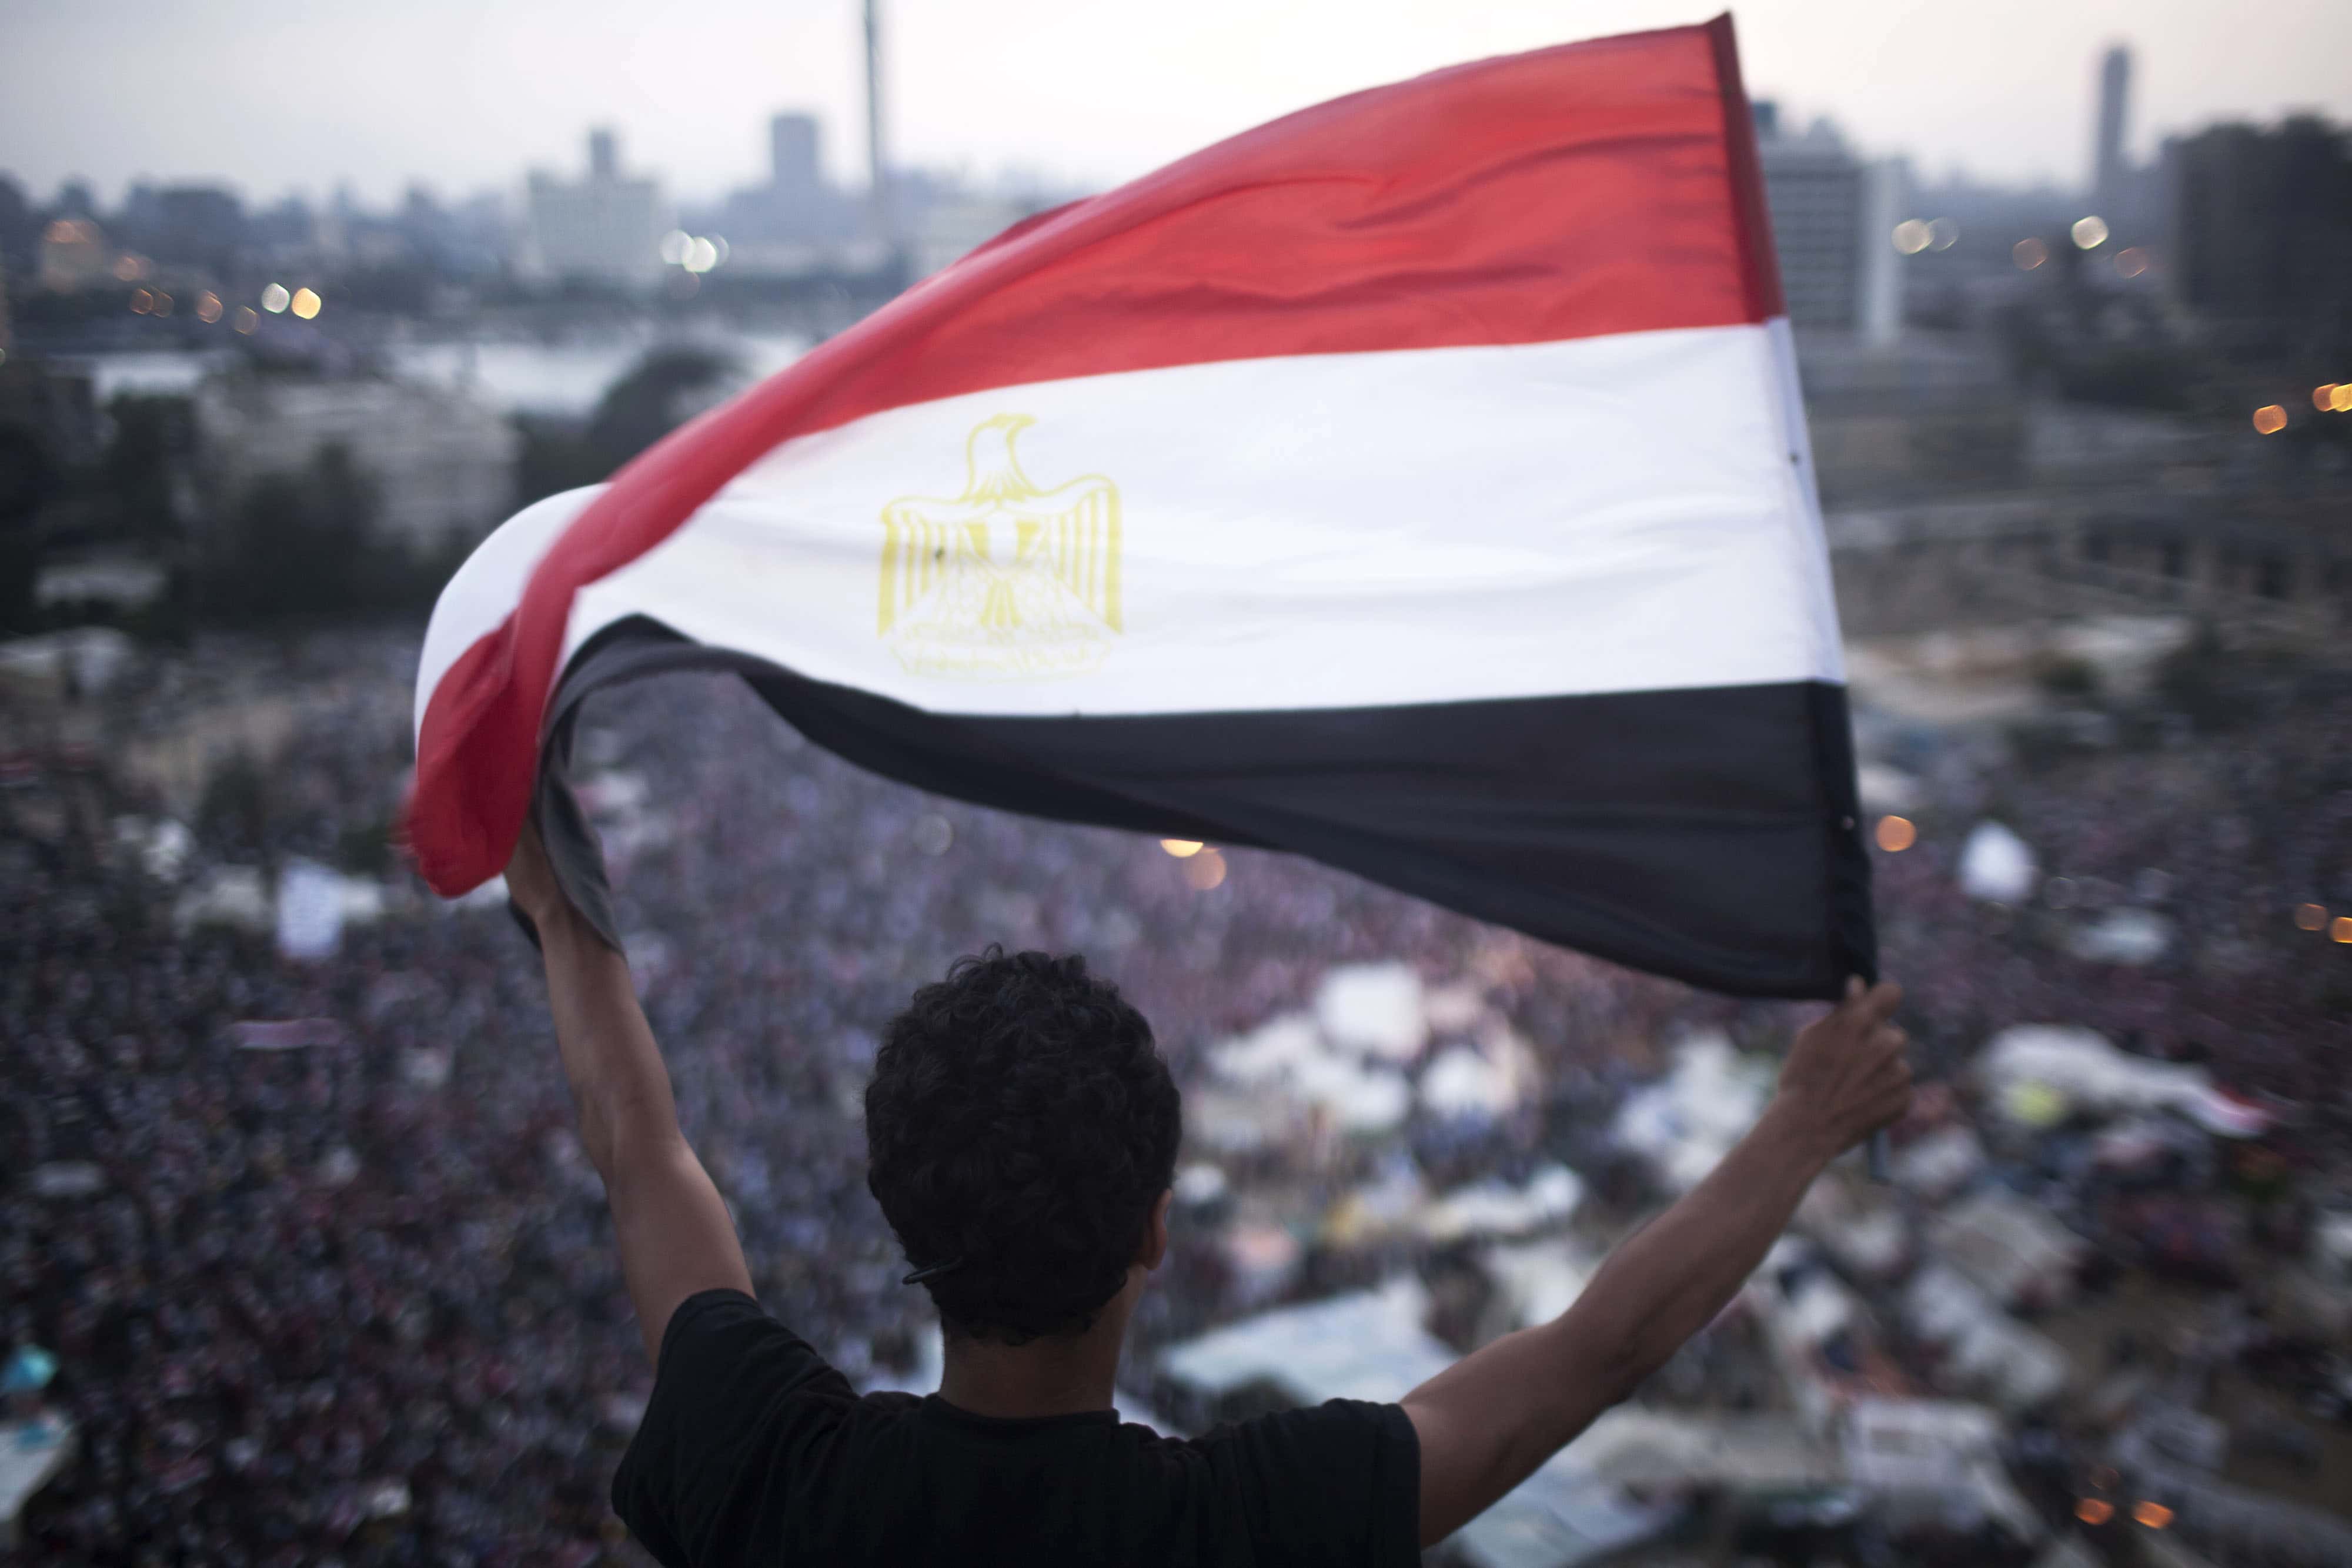 An Egyptian protester waves a flag in Tahrir square on 1 July 2013, AP Photo/Manu Brabo